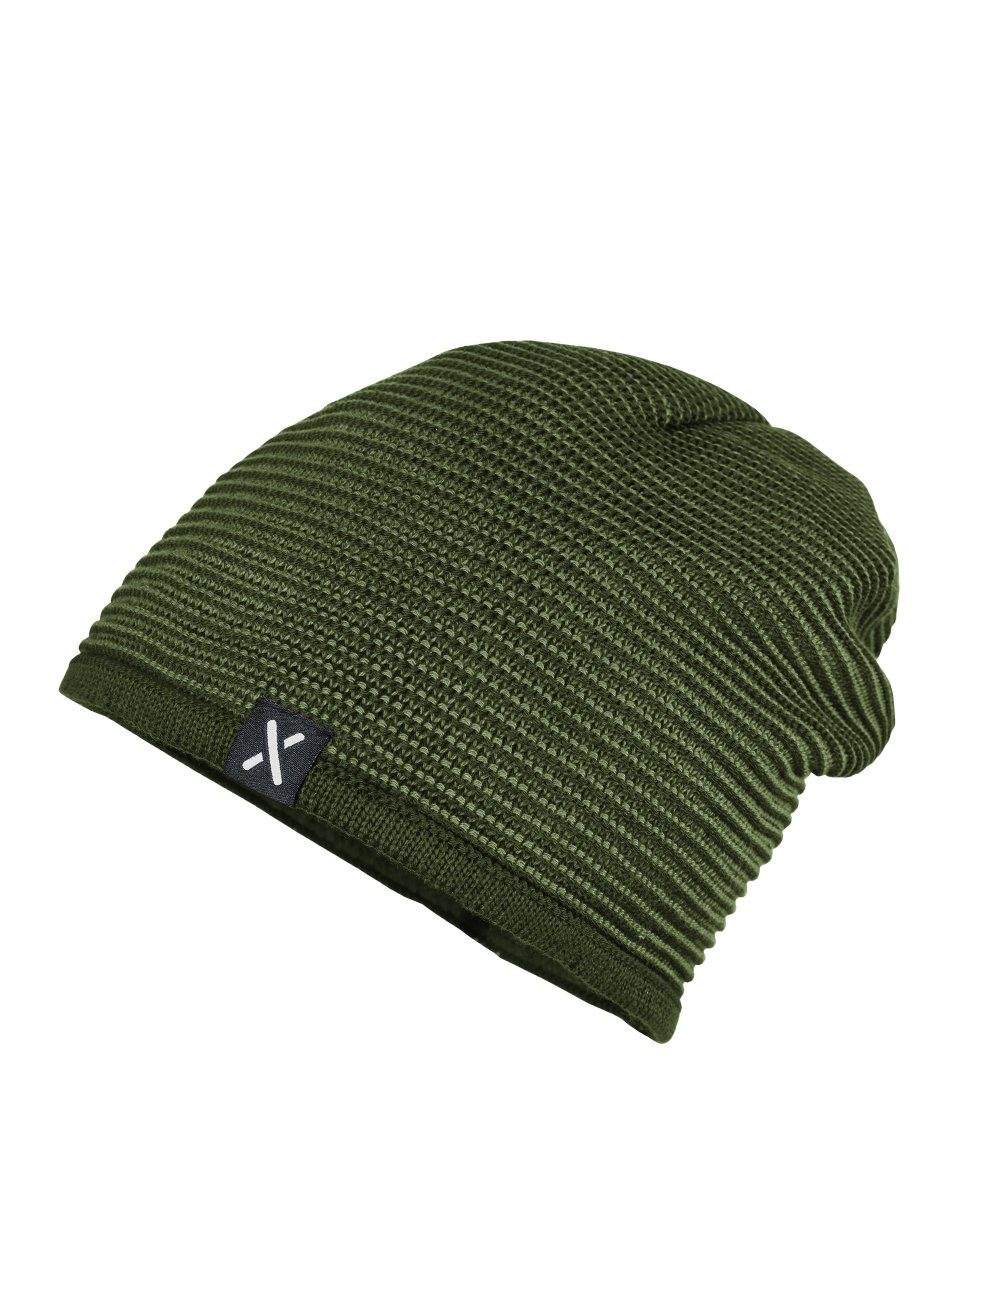 MAXIMO Strickmütze in Made middle dunkelkhaki/chive KIDS-Beanie Germany